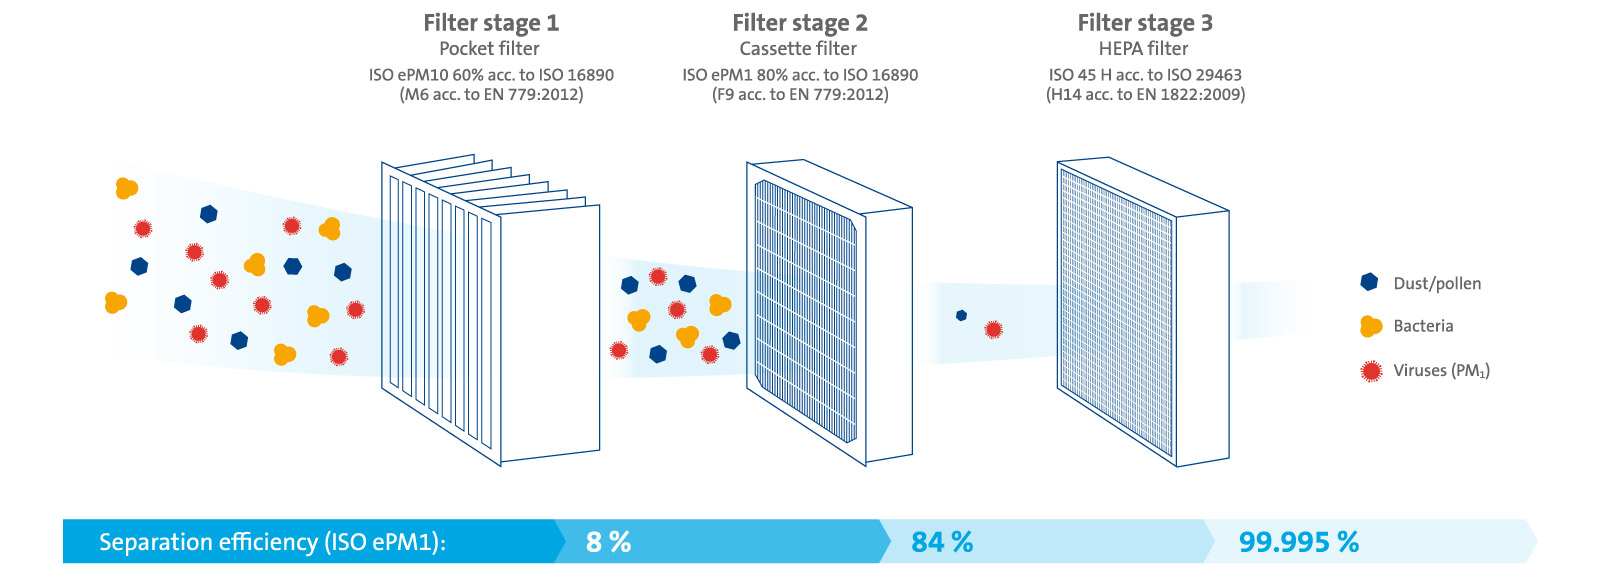 Filter stages and separation efficiencies